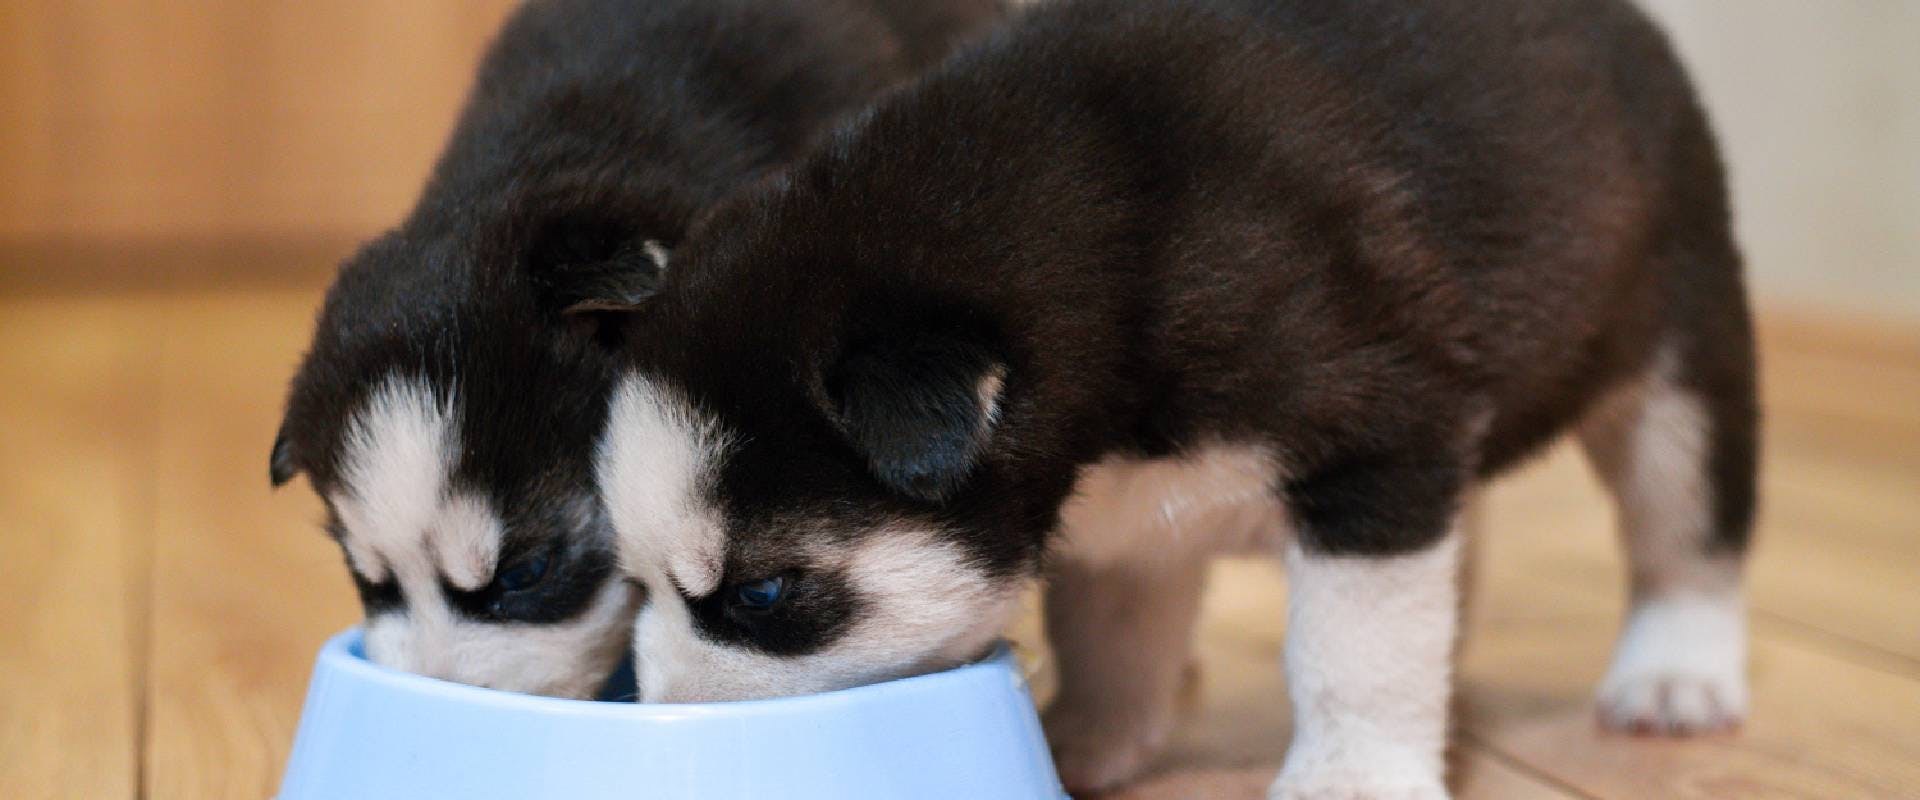 Husky puppies eating from a bowl